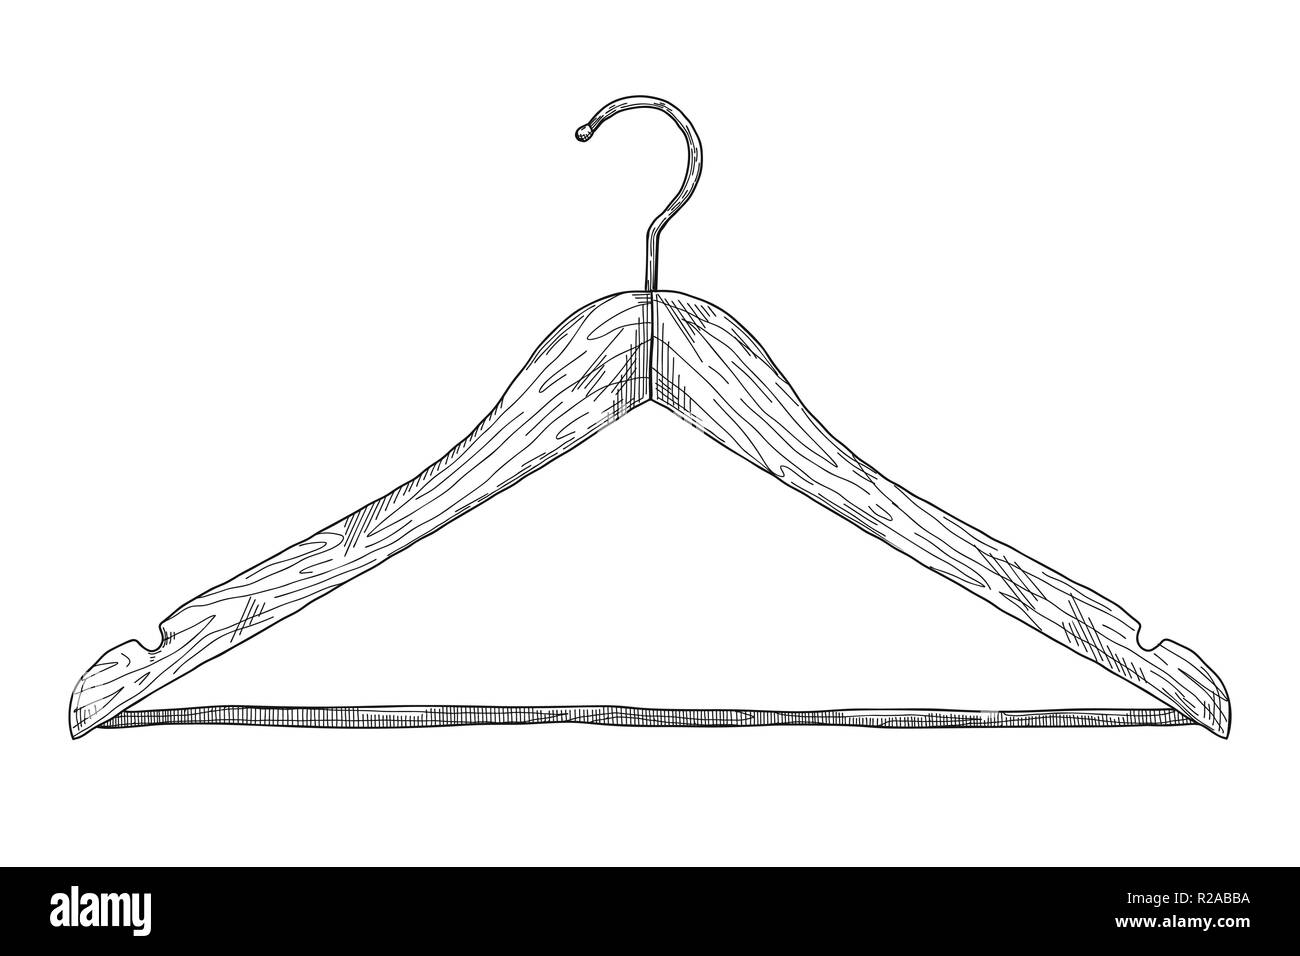 Sketch of clothes hangers isolated on white background. Vector Stock Vector